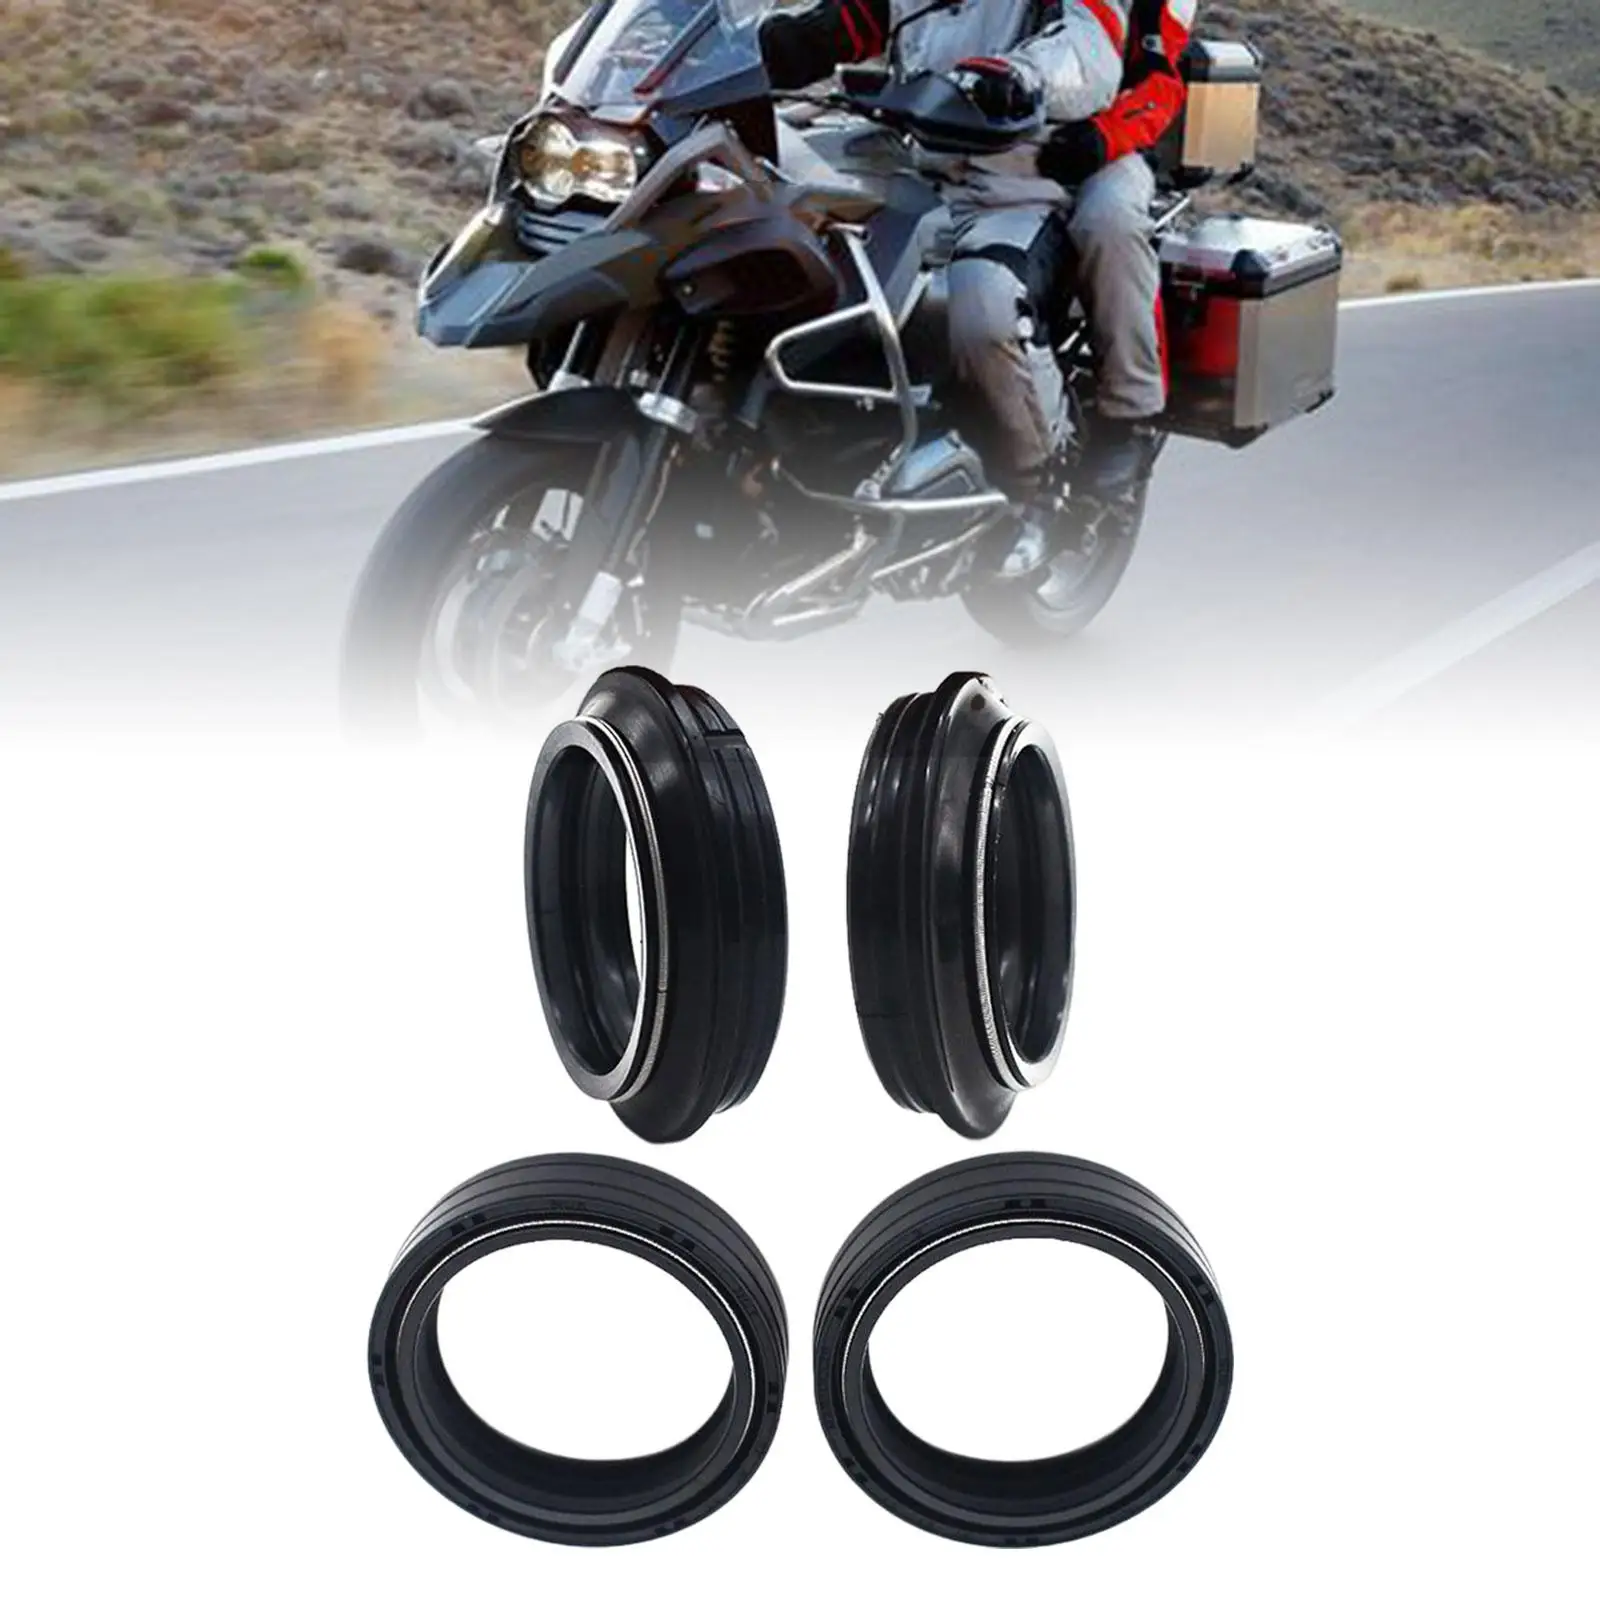 Front Fork Shock Oil Seal and Dust Seal Set Rubber Accessory for BMW R1200GS